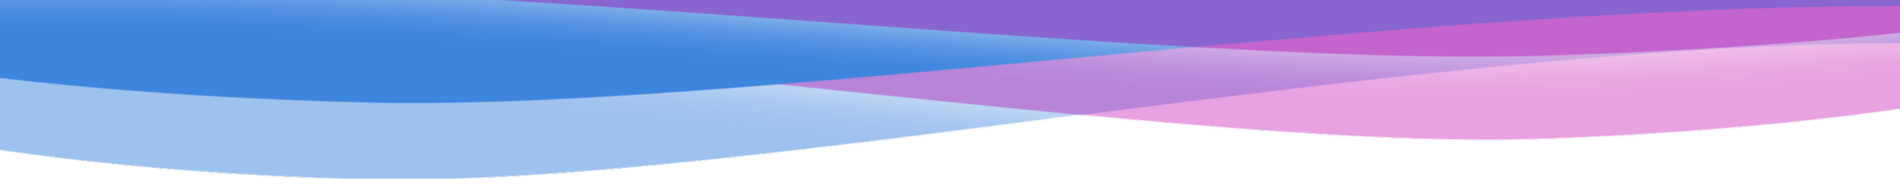 Decoration with abstract blue and purple waves